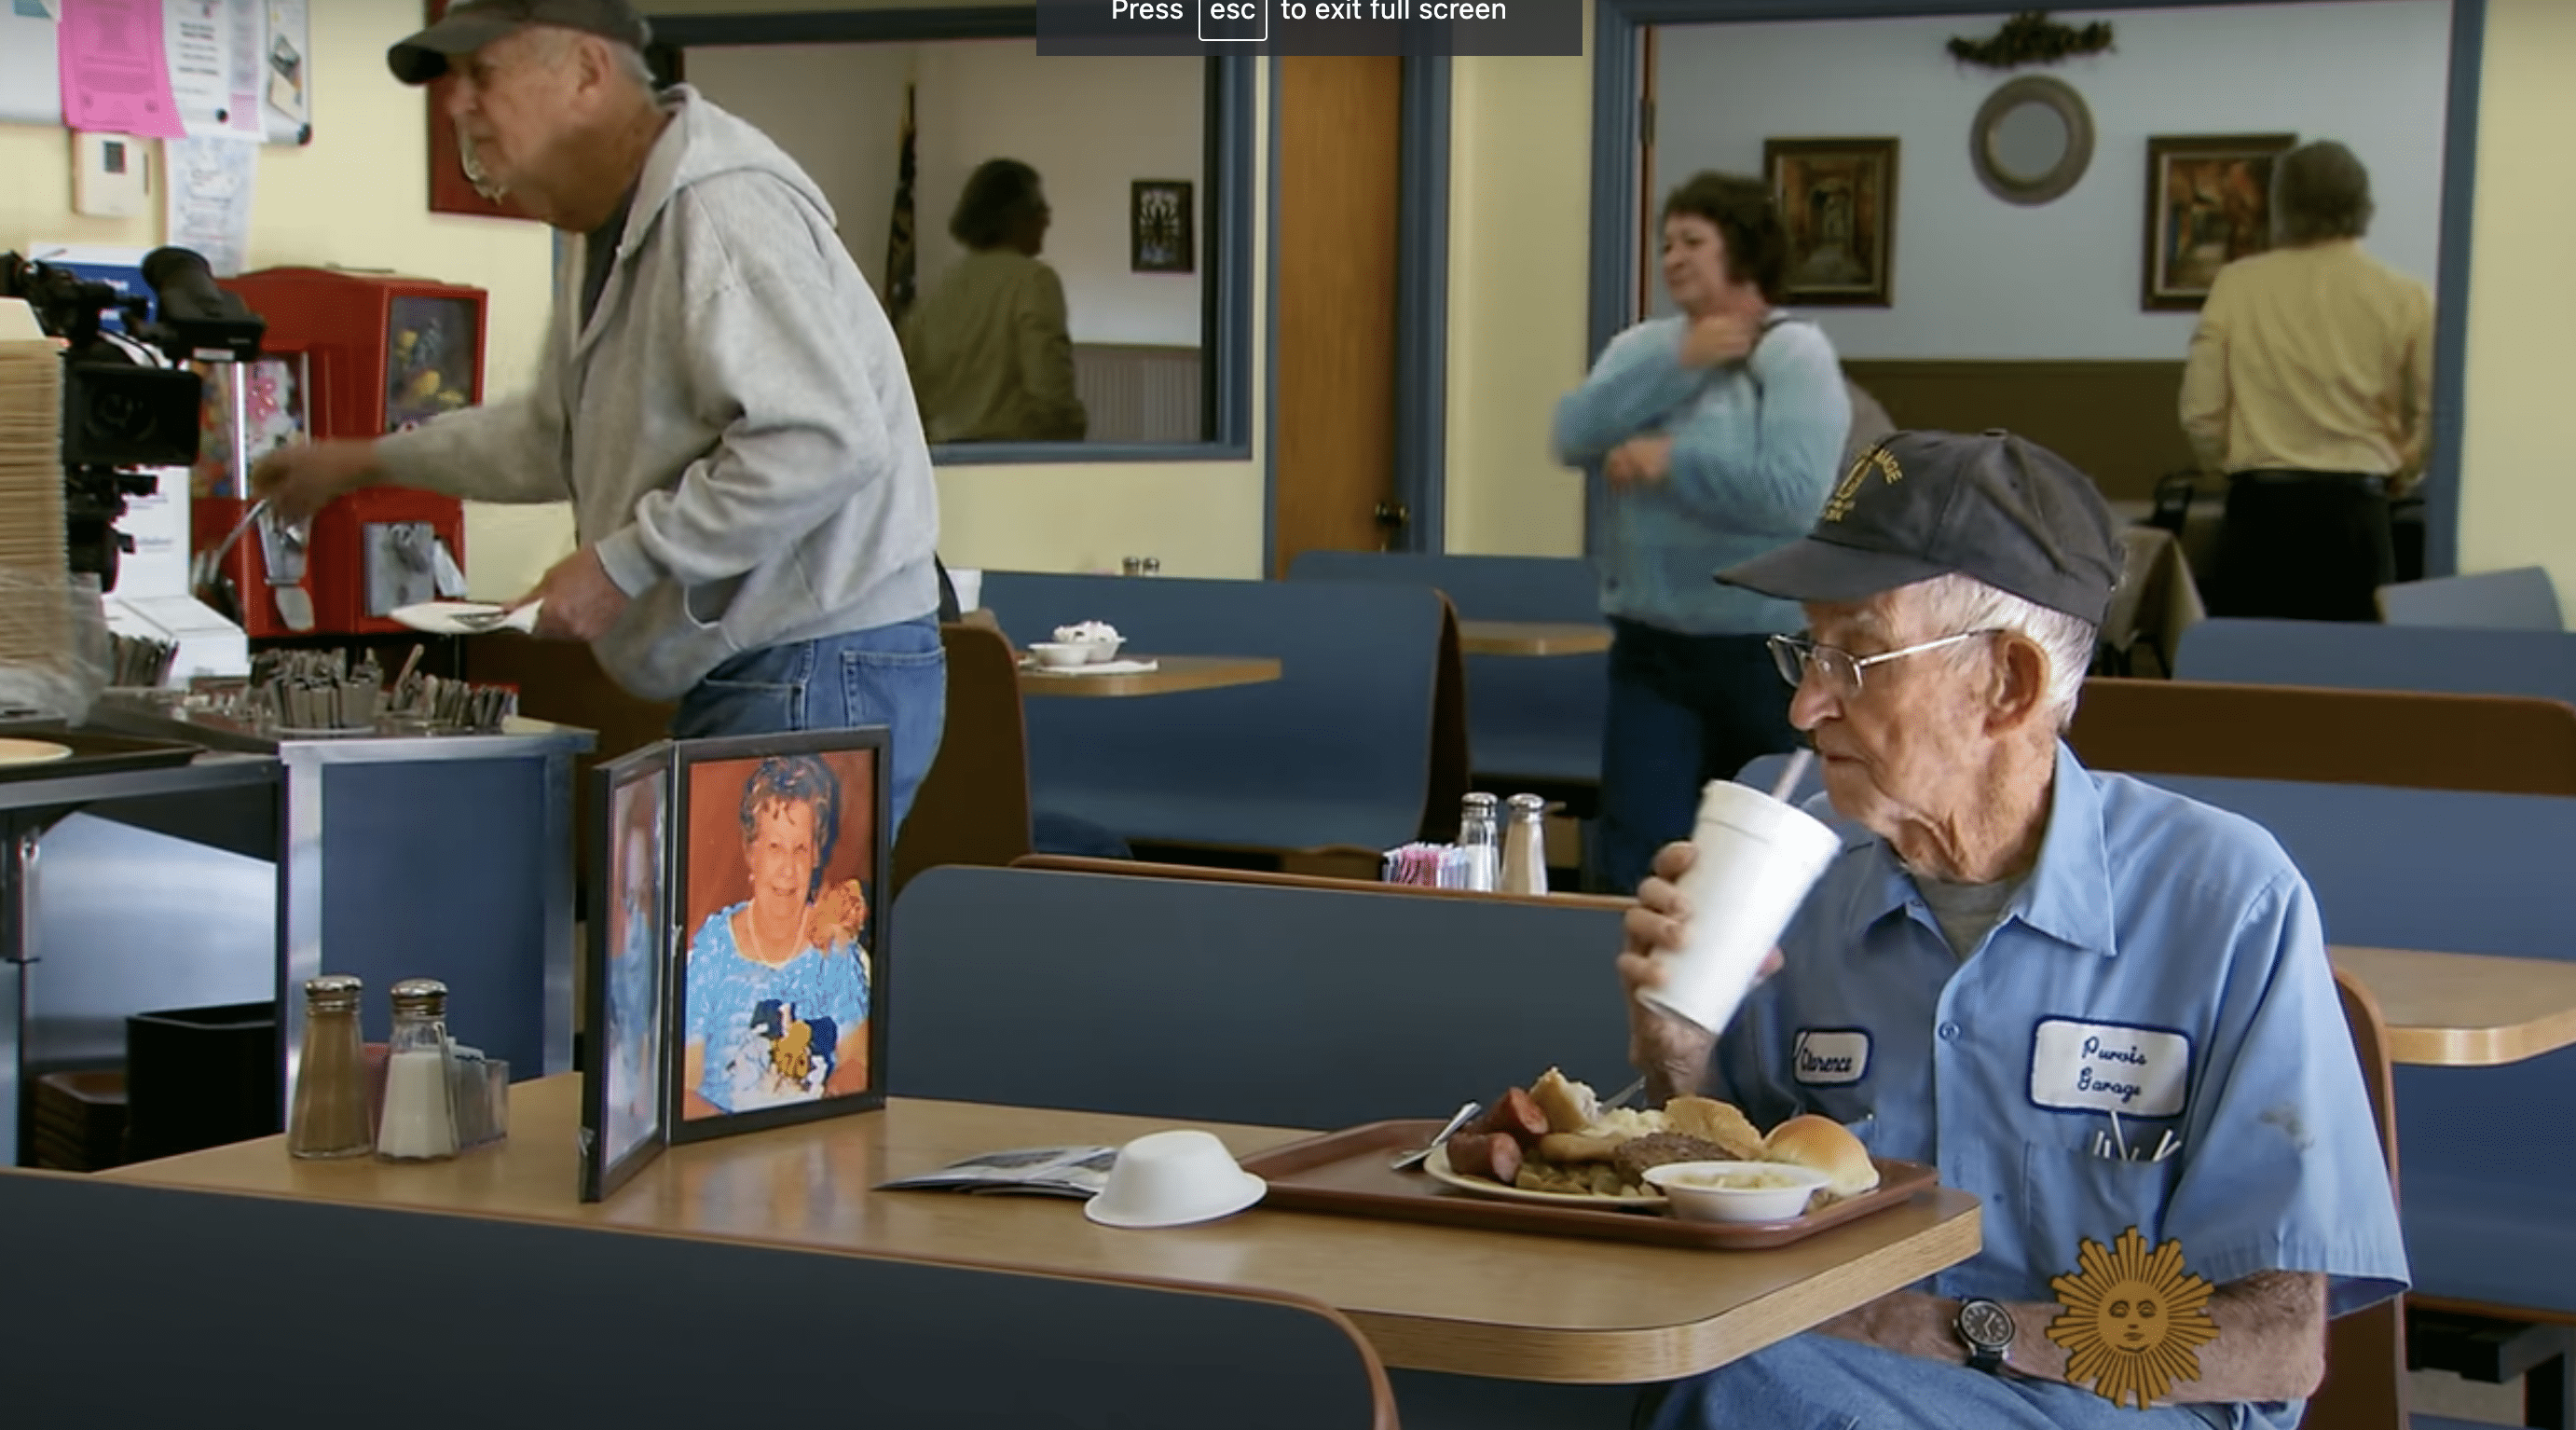 93-year-old retired Mechanic, Clarence Purvis during a lunch date with his late wife, Carolyn Todd | Source: YouTube/CBS Sunday Morning